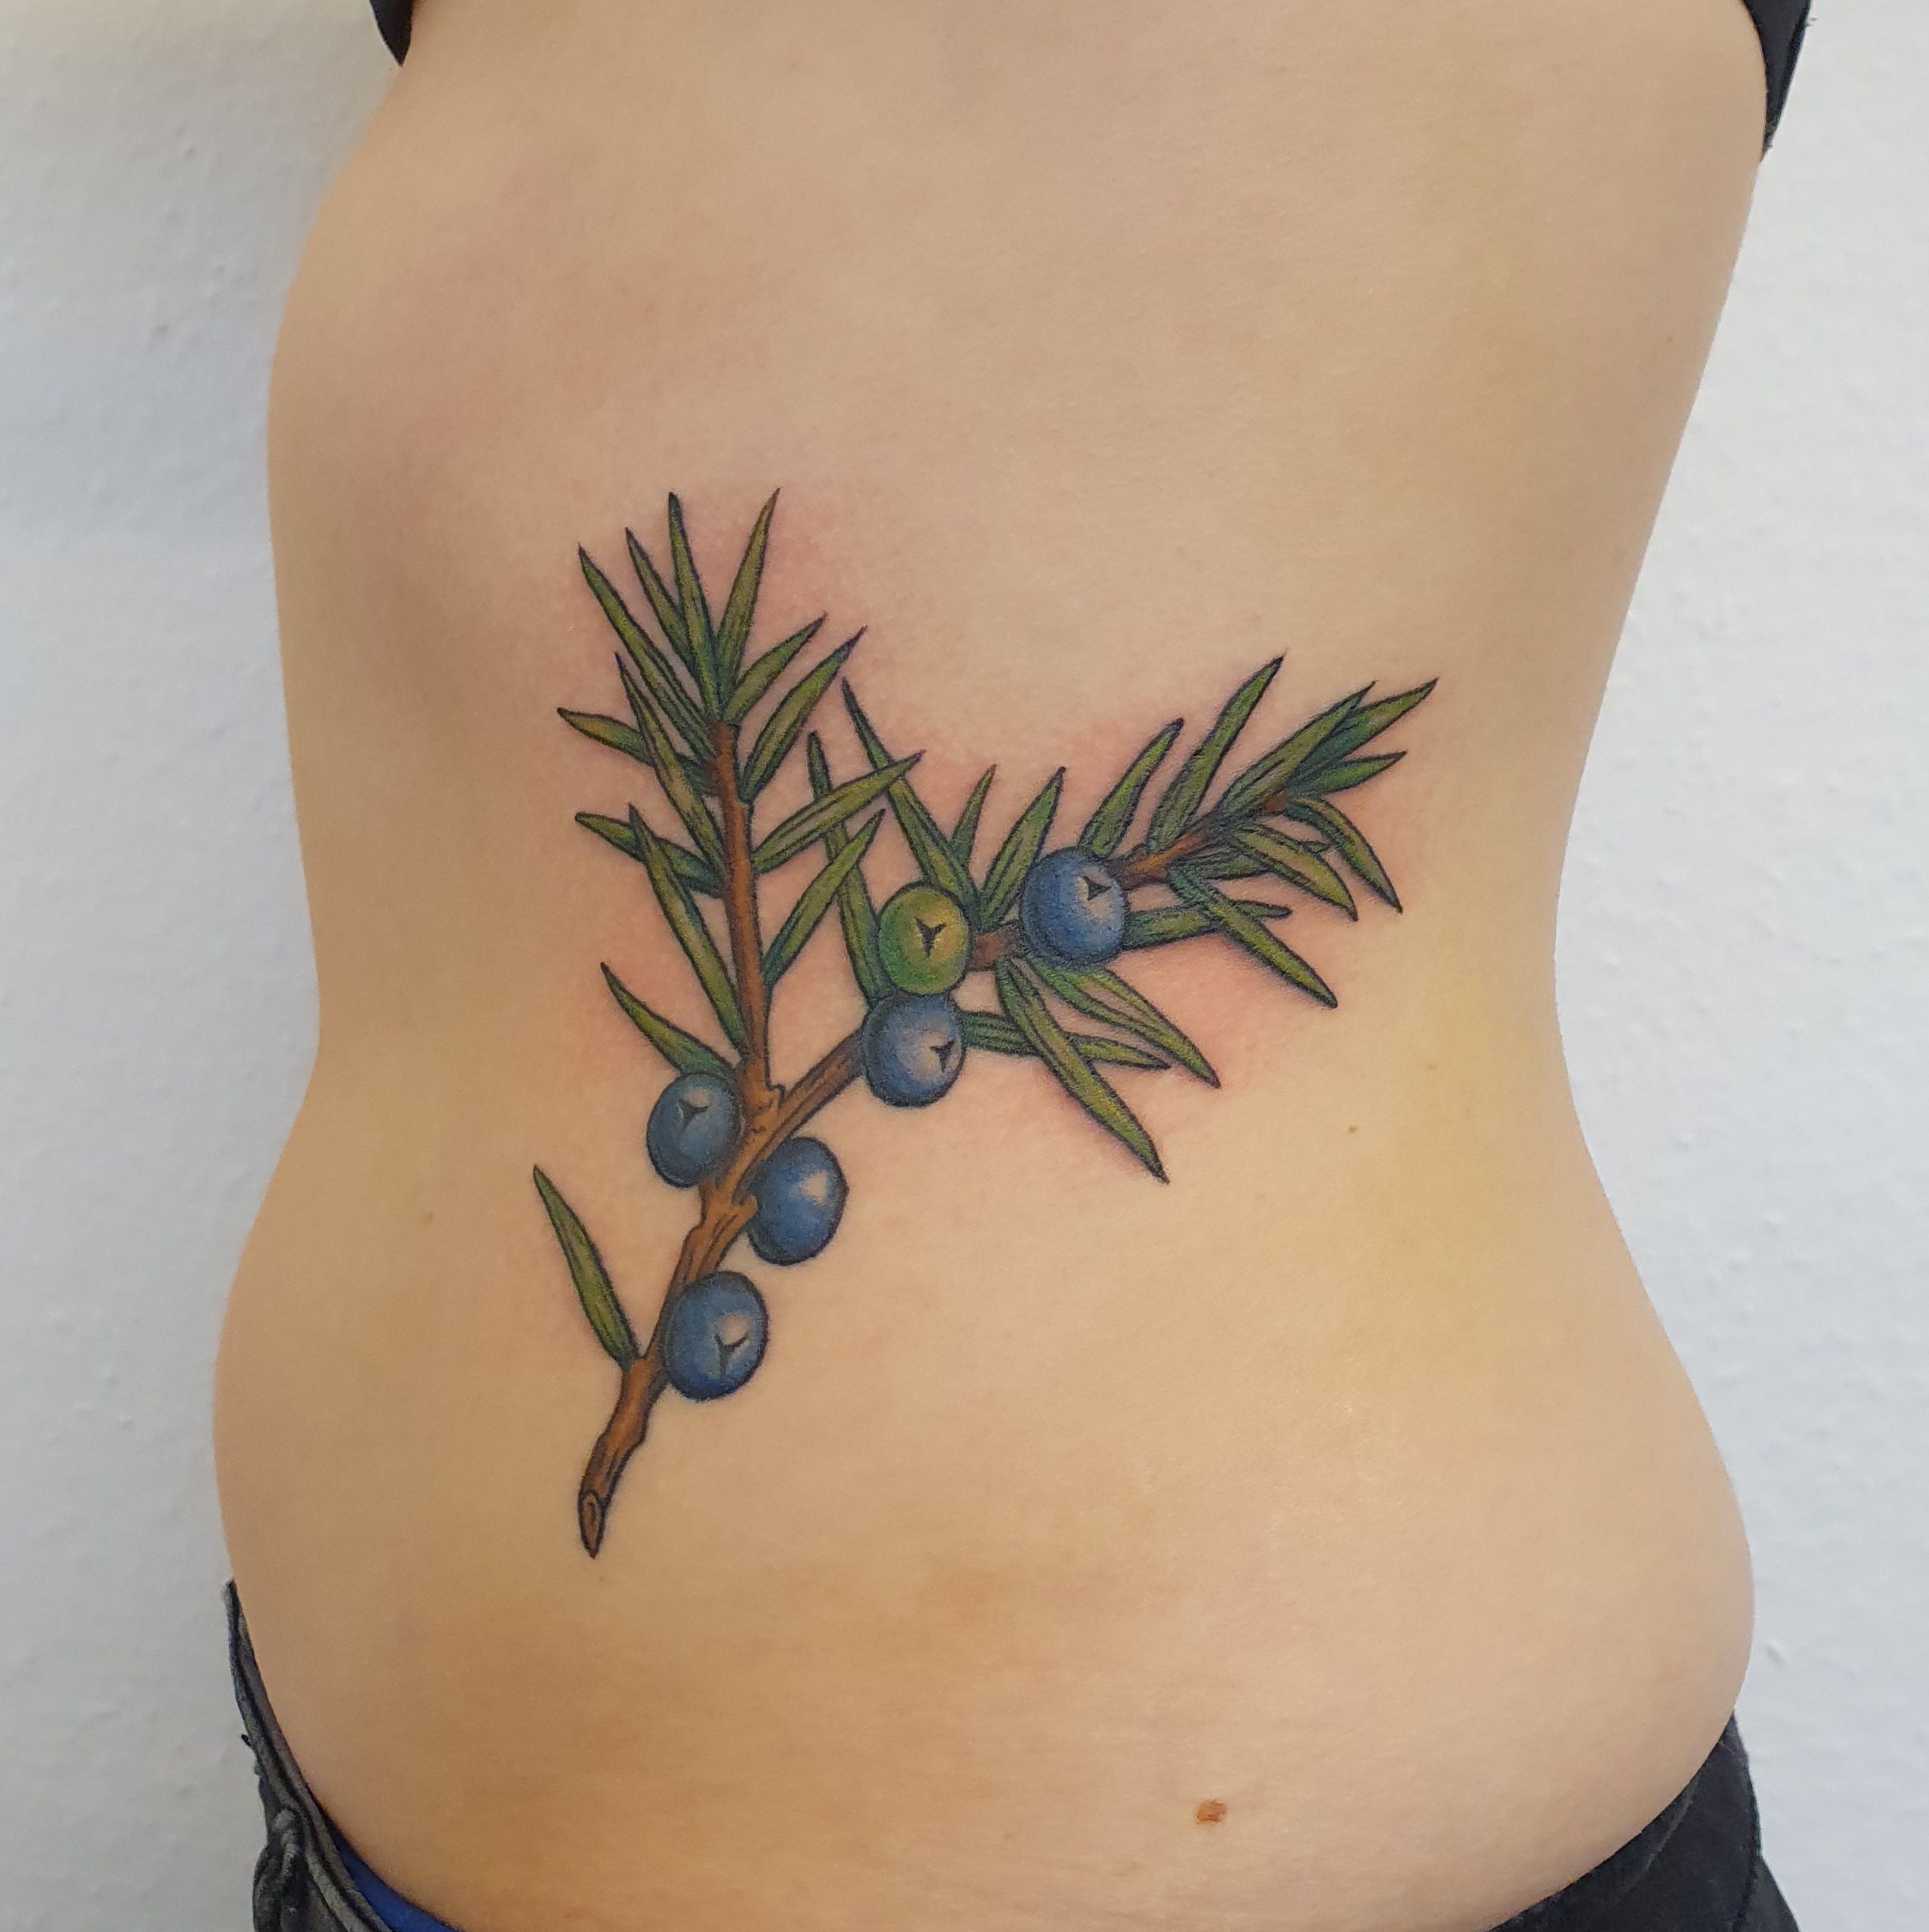 I thought Id like the Juniper berries but now Im not feeling it  Anything nature Witchy related youd think looks good here   rTattoocoverups